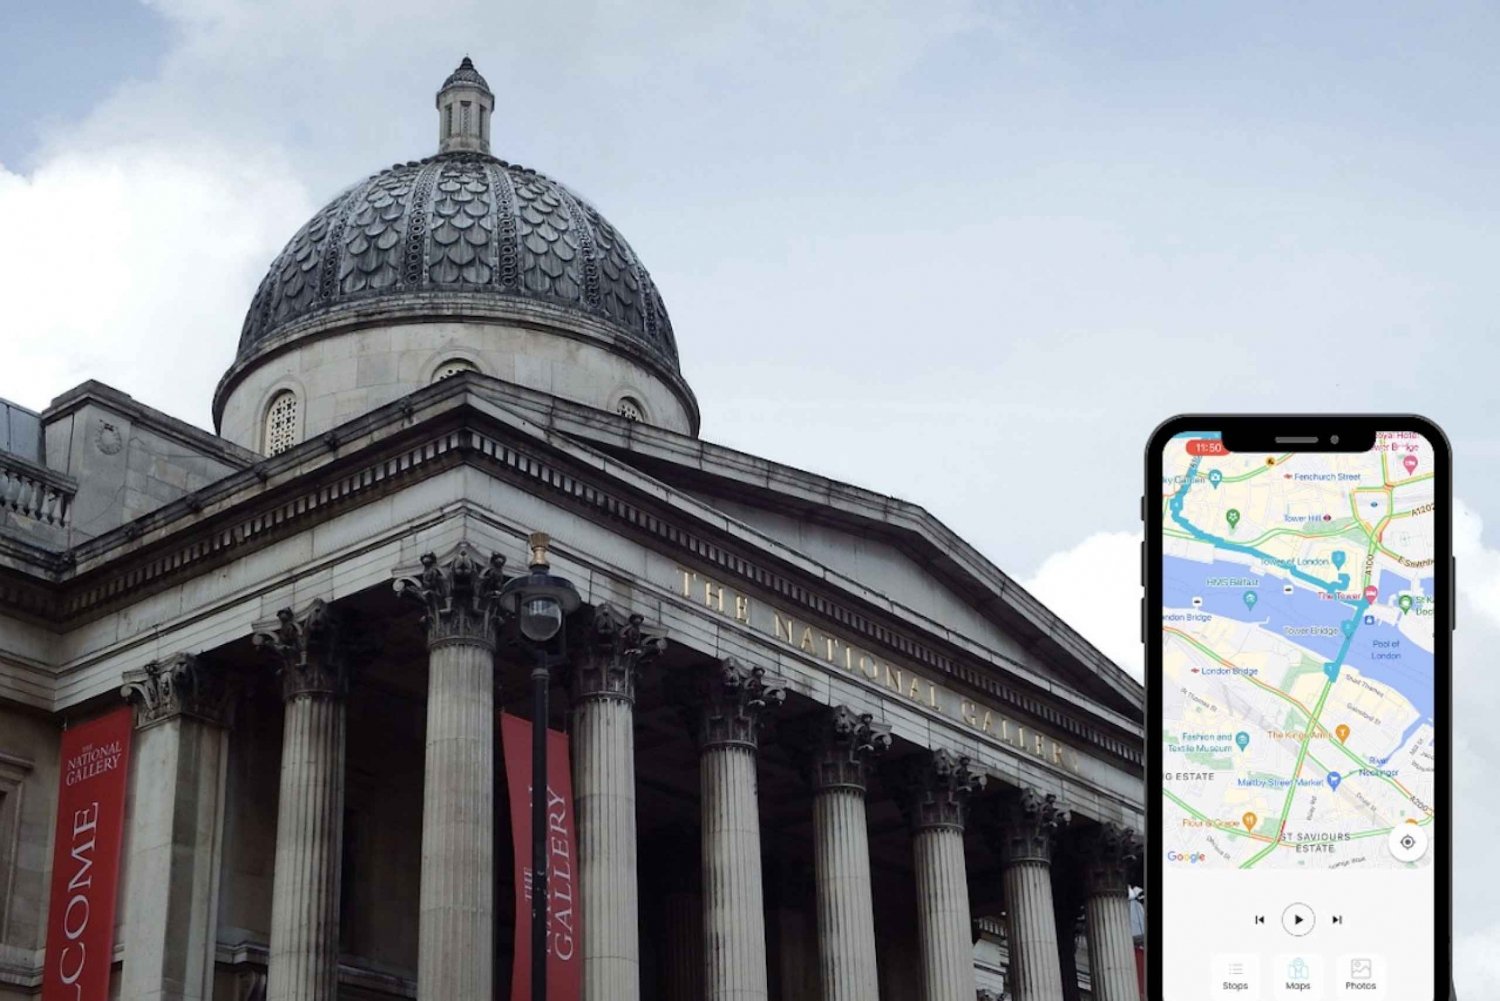 London: National Gallery Express-tur med smartphone-app